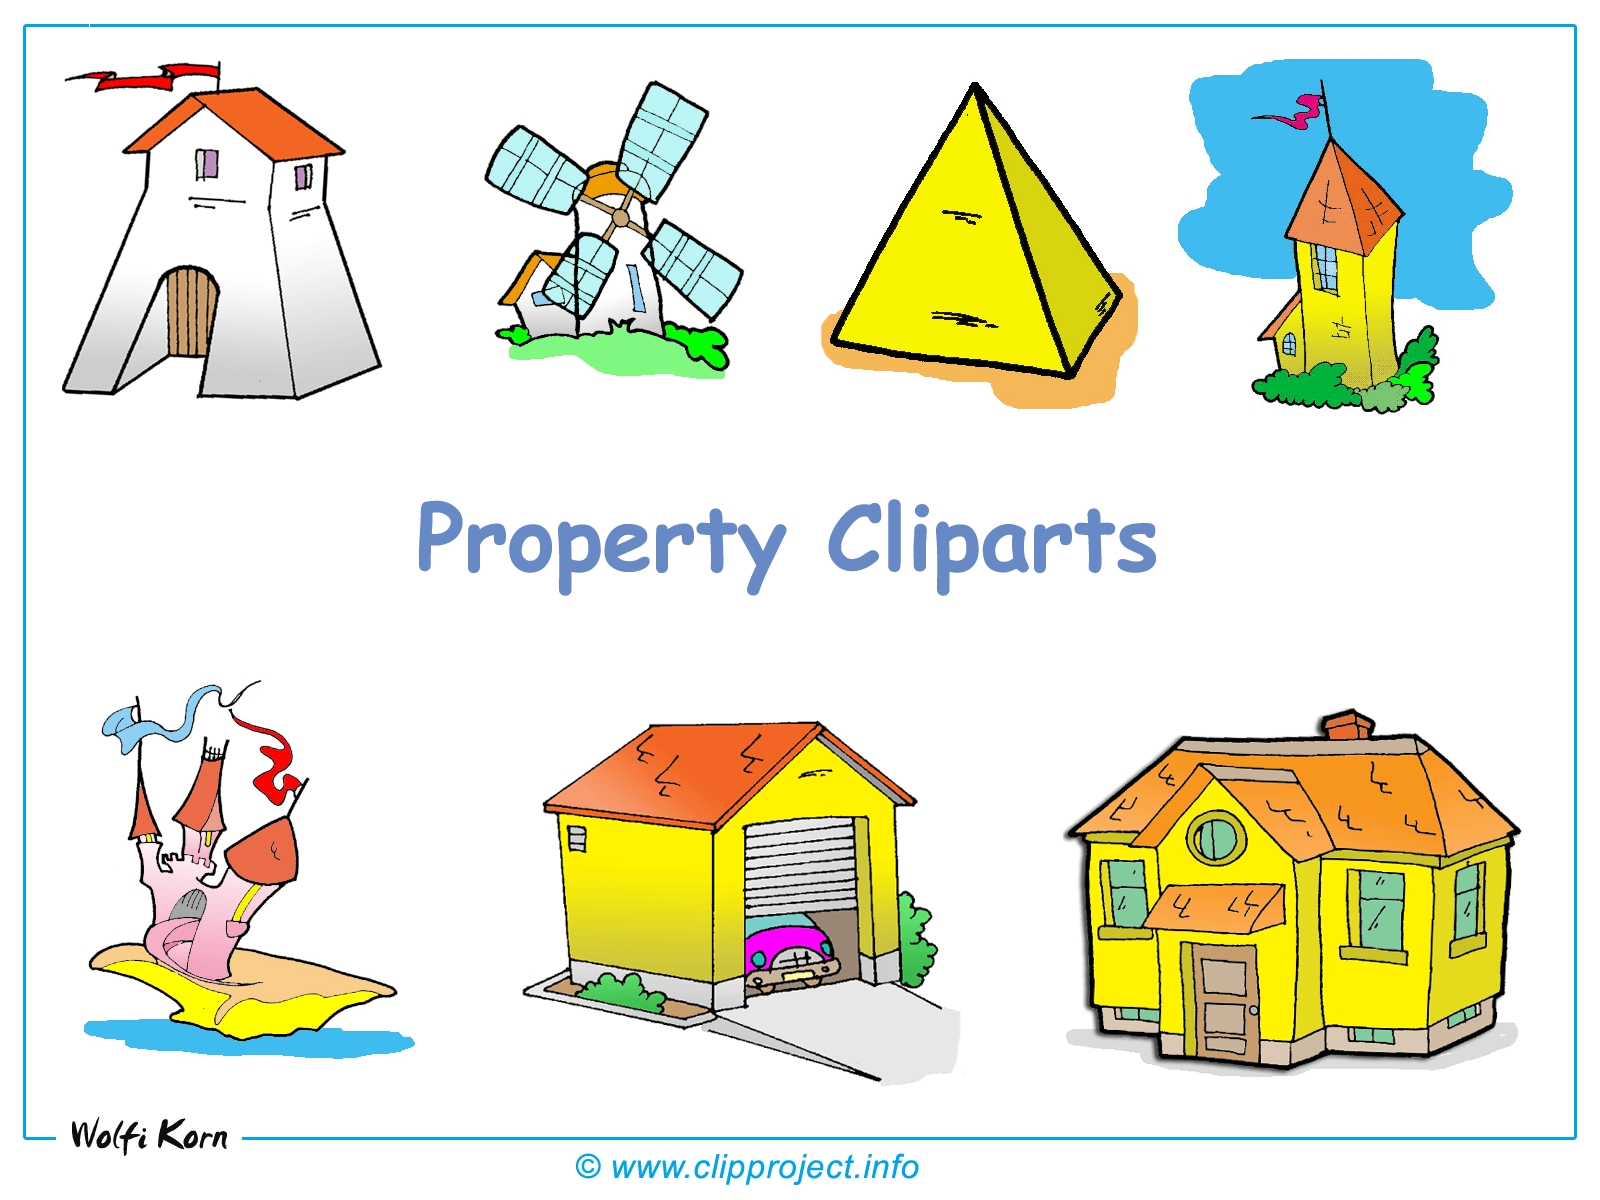 Free clipart downloads Best of Download cliparts Clipart Collection.